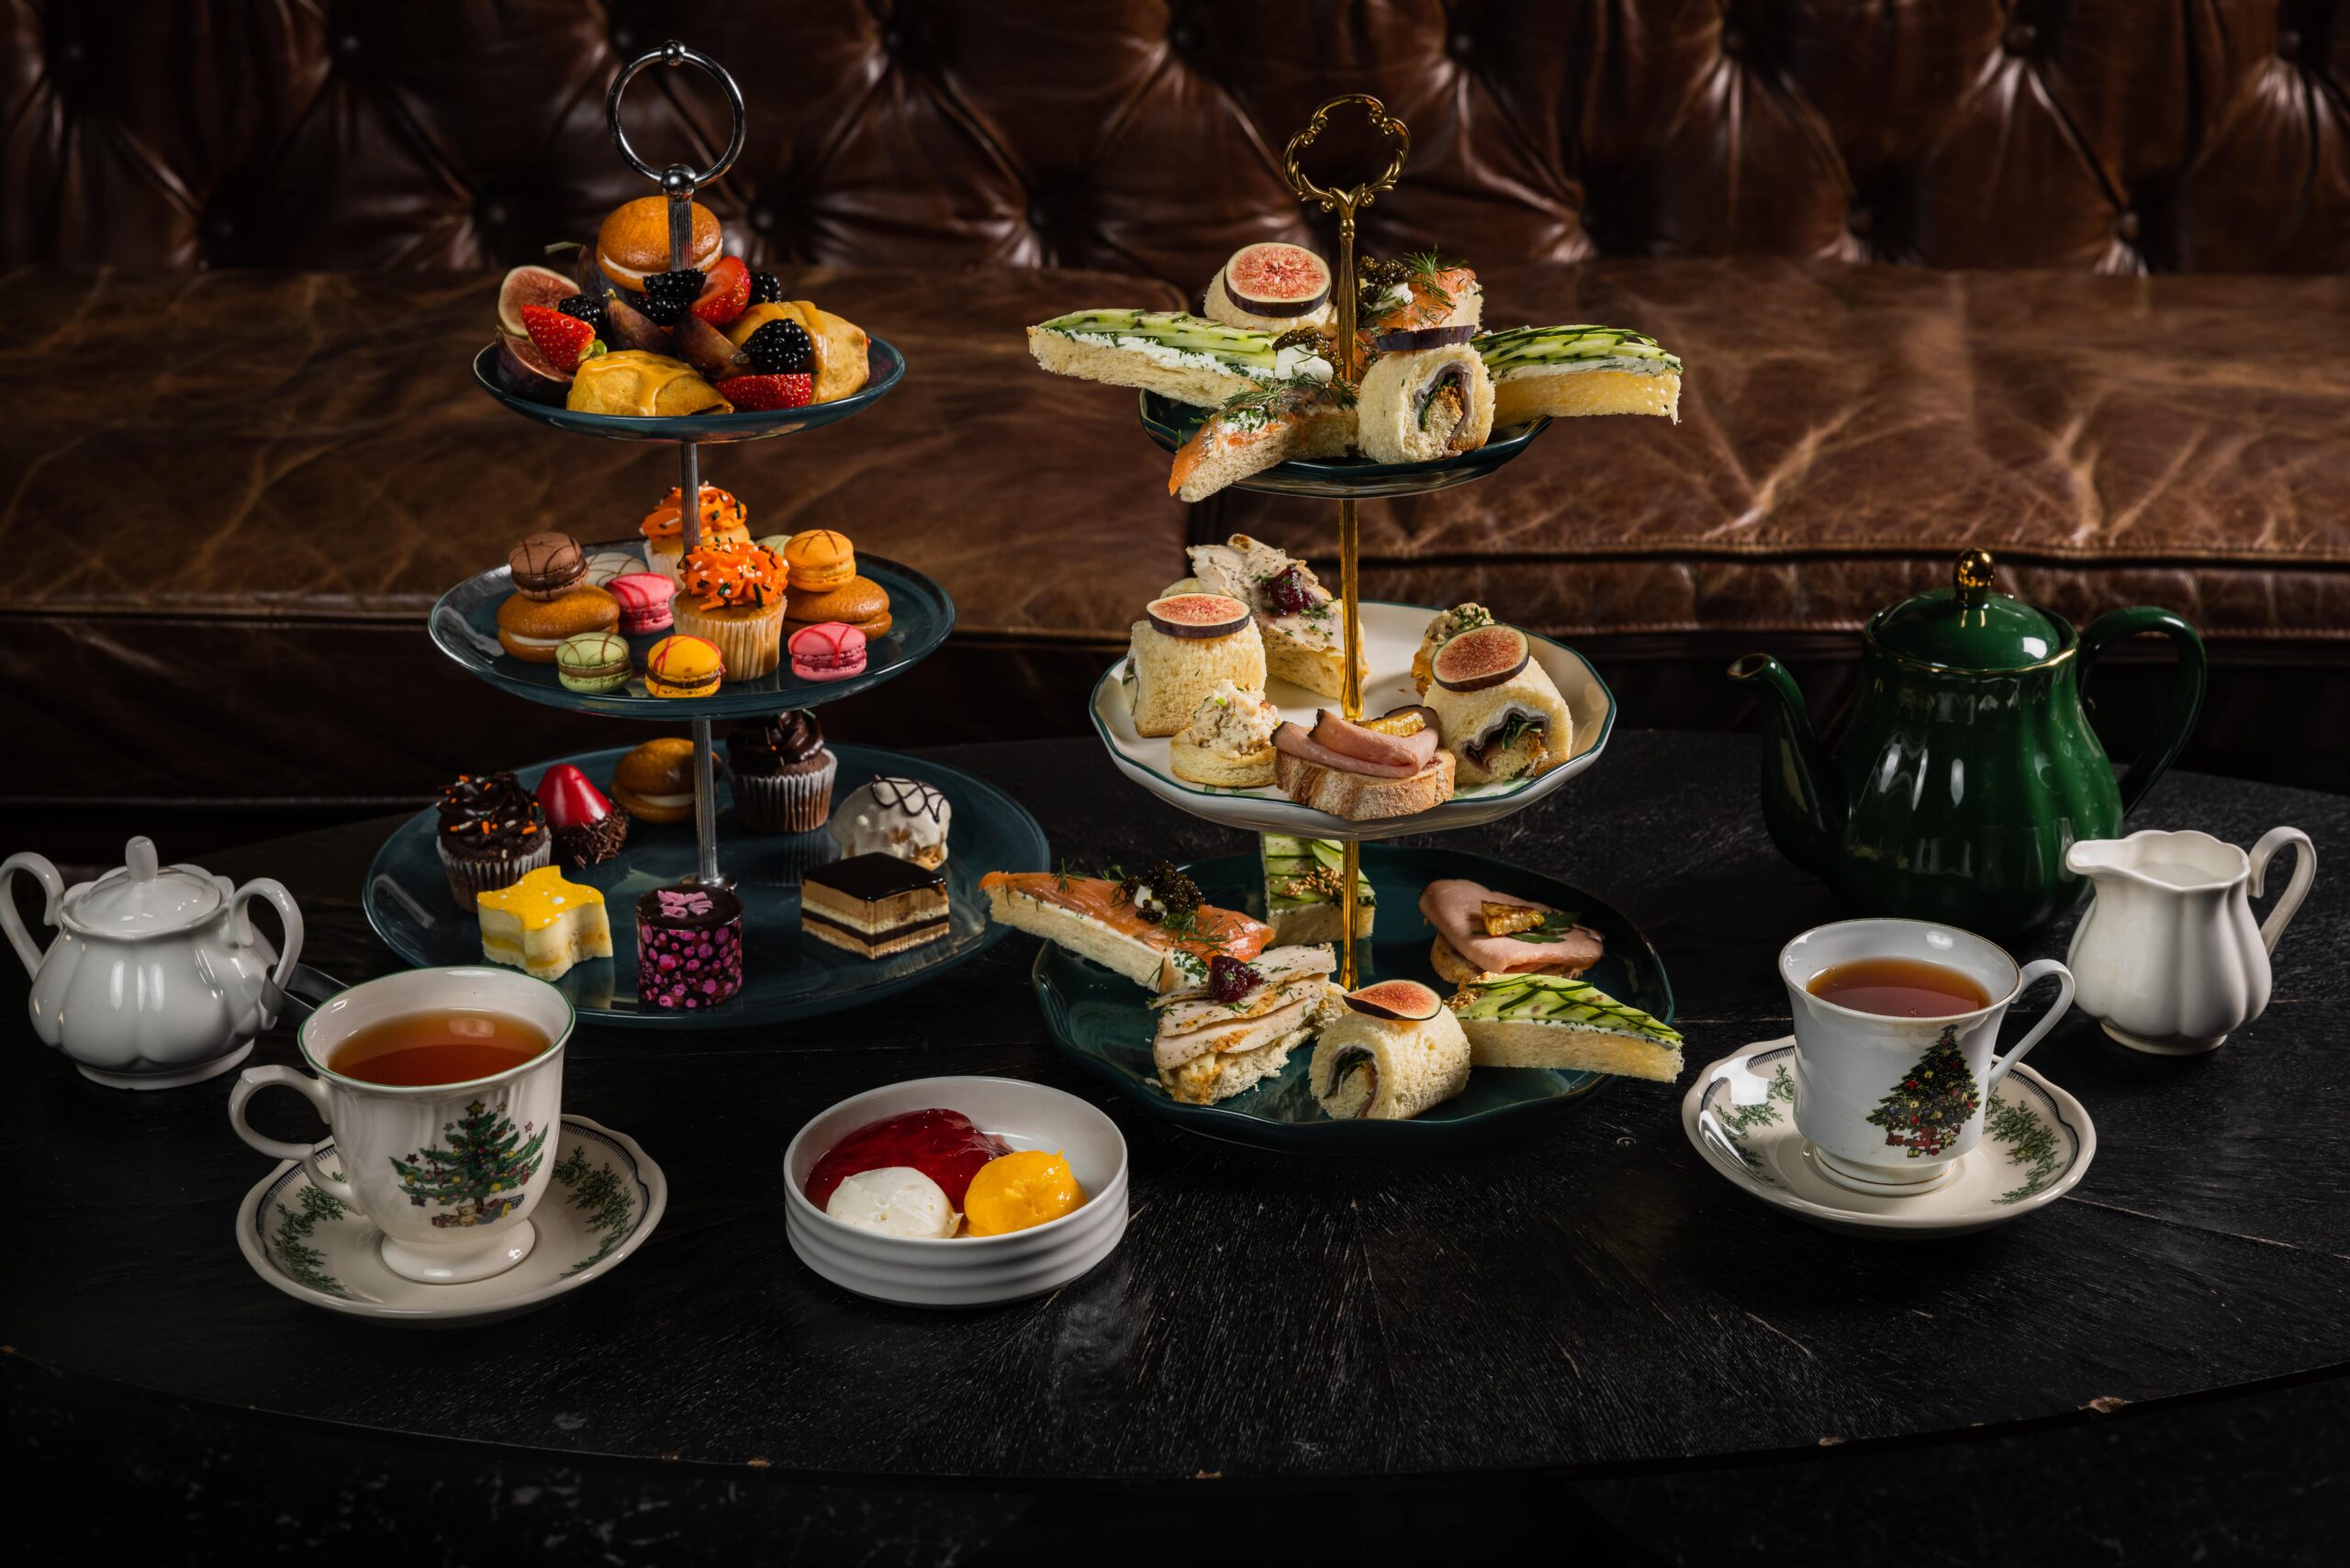 The Holiday High Tea and Highballs at DTLA's Lilly Rose features a tea selection and a savory and sweet tea tower.